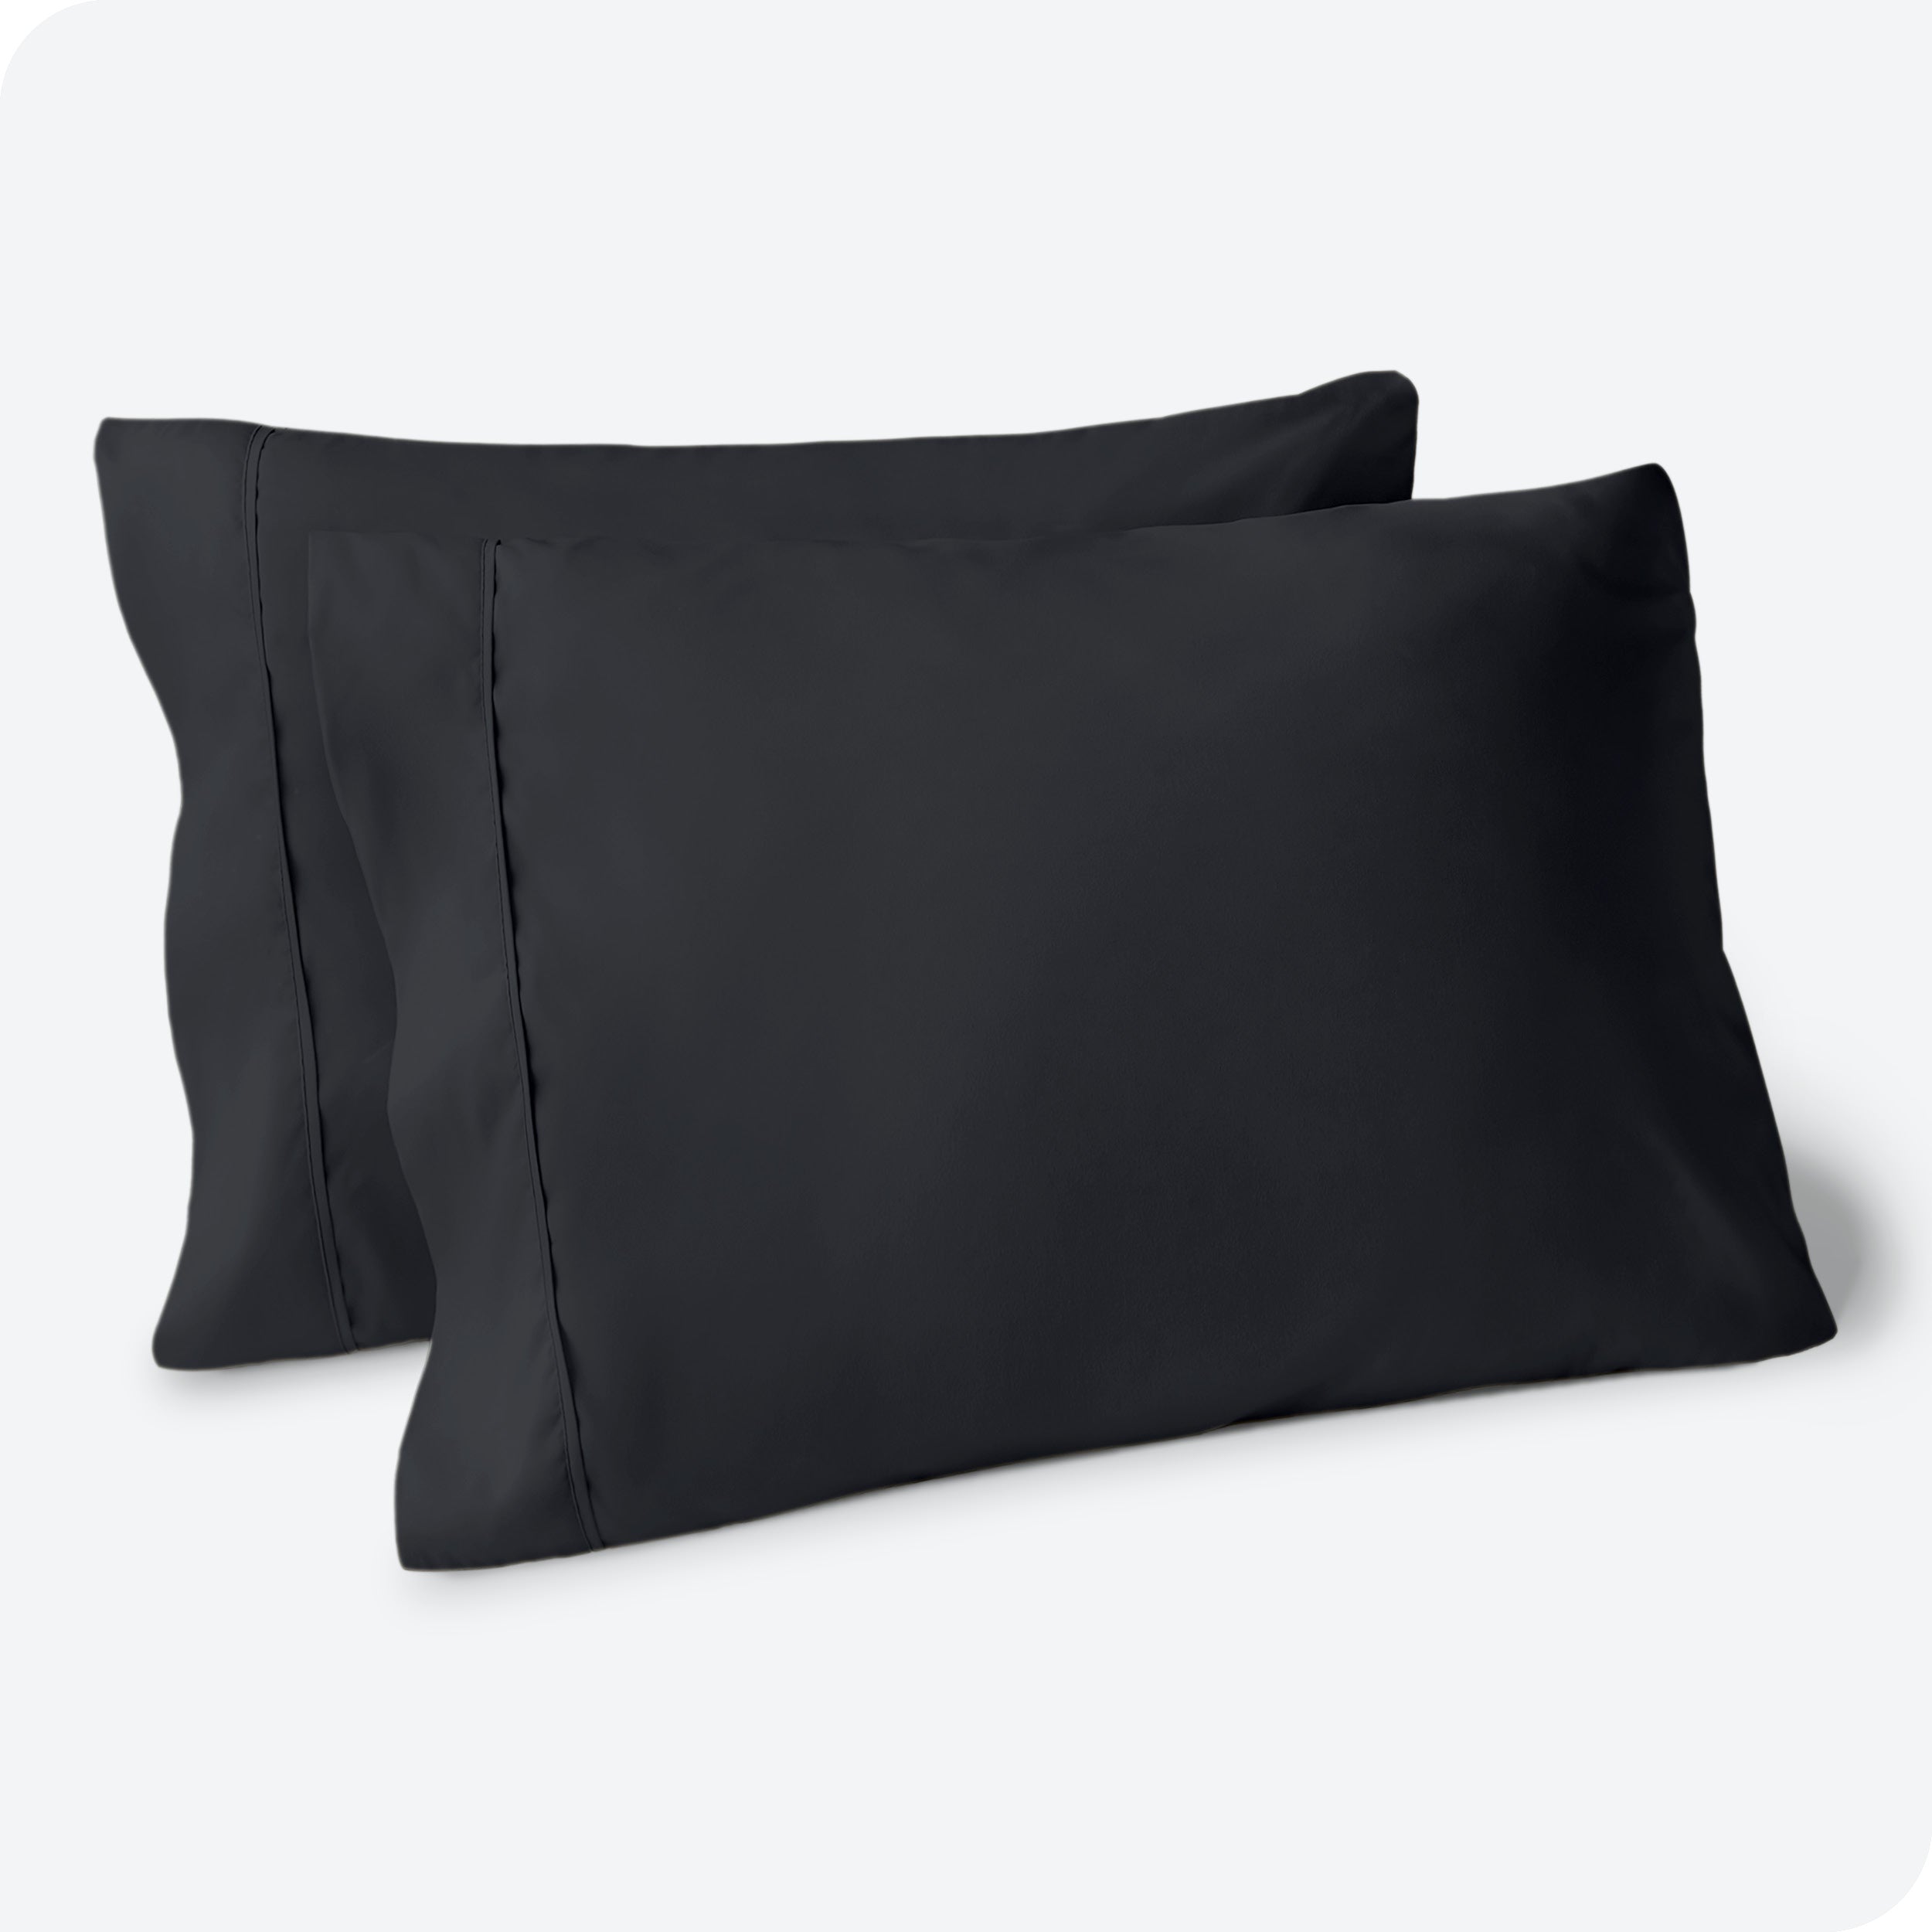 Two pillows on a white background with black pillowcases on them